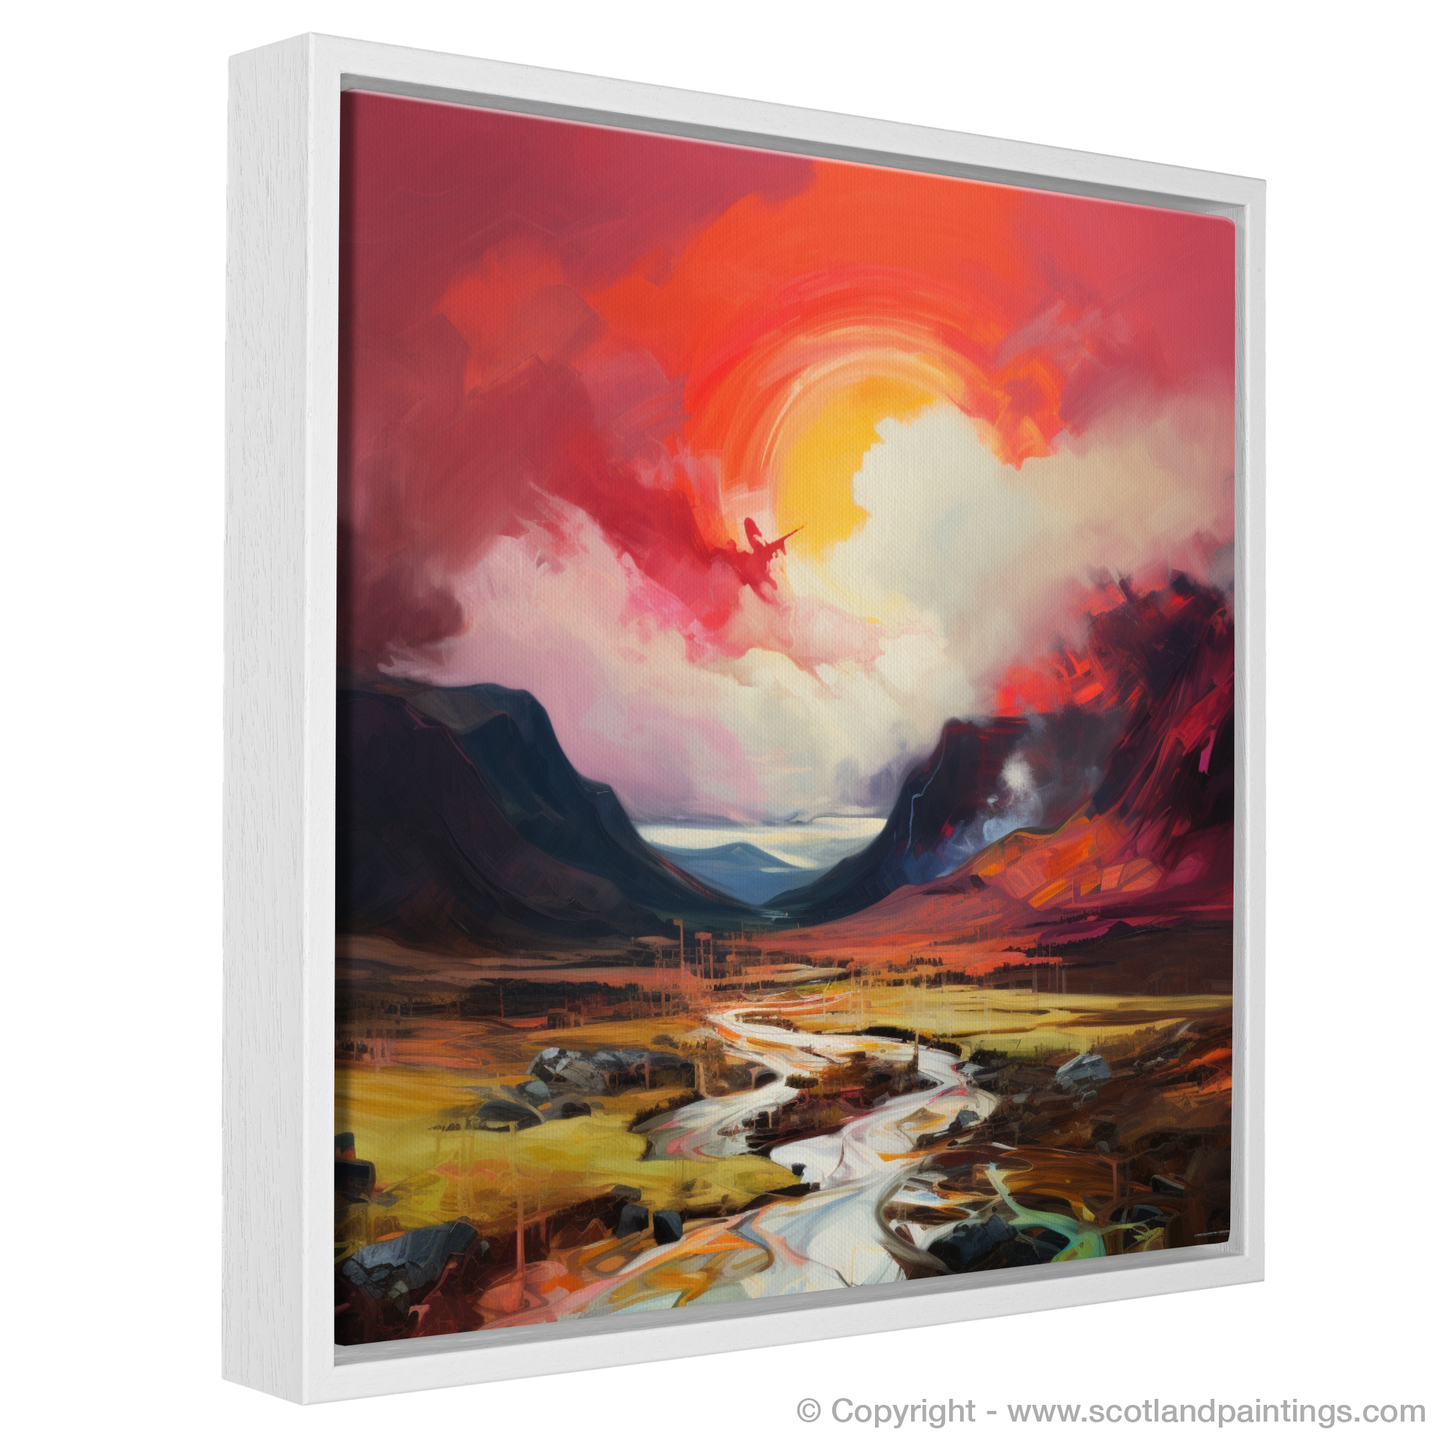 Painting and Art Print of Crimson clouds over valley in Glencoe entitled "Crimson Clouds over Glencoe Valley".